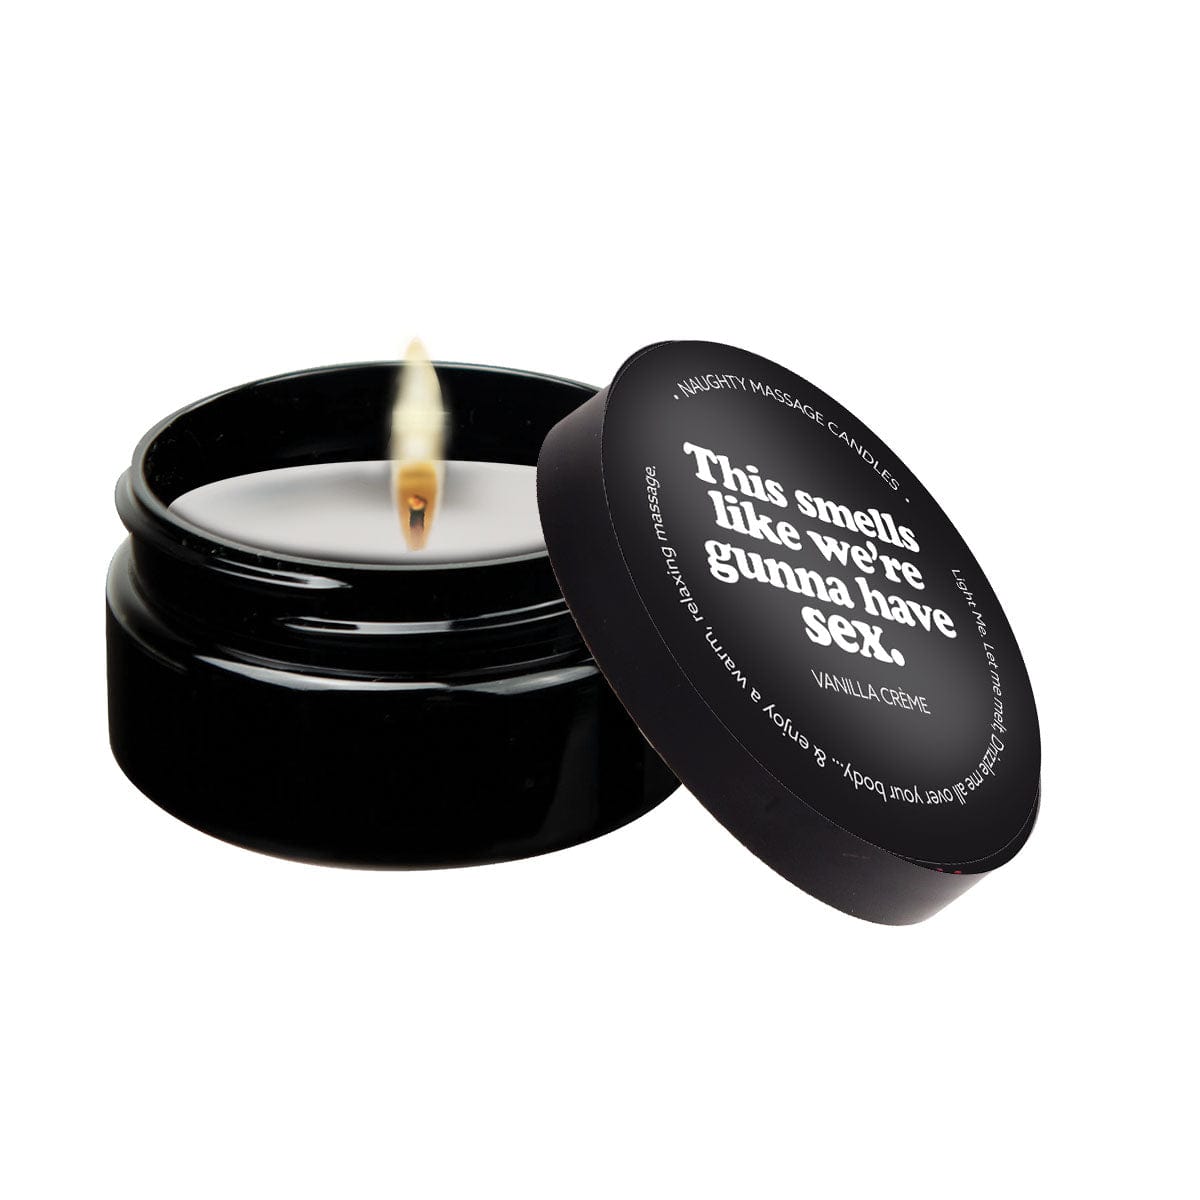 This Smells Like We're Gunna Have Sex - Naughty Mini Massage Candle Lubes Kama Sutra   